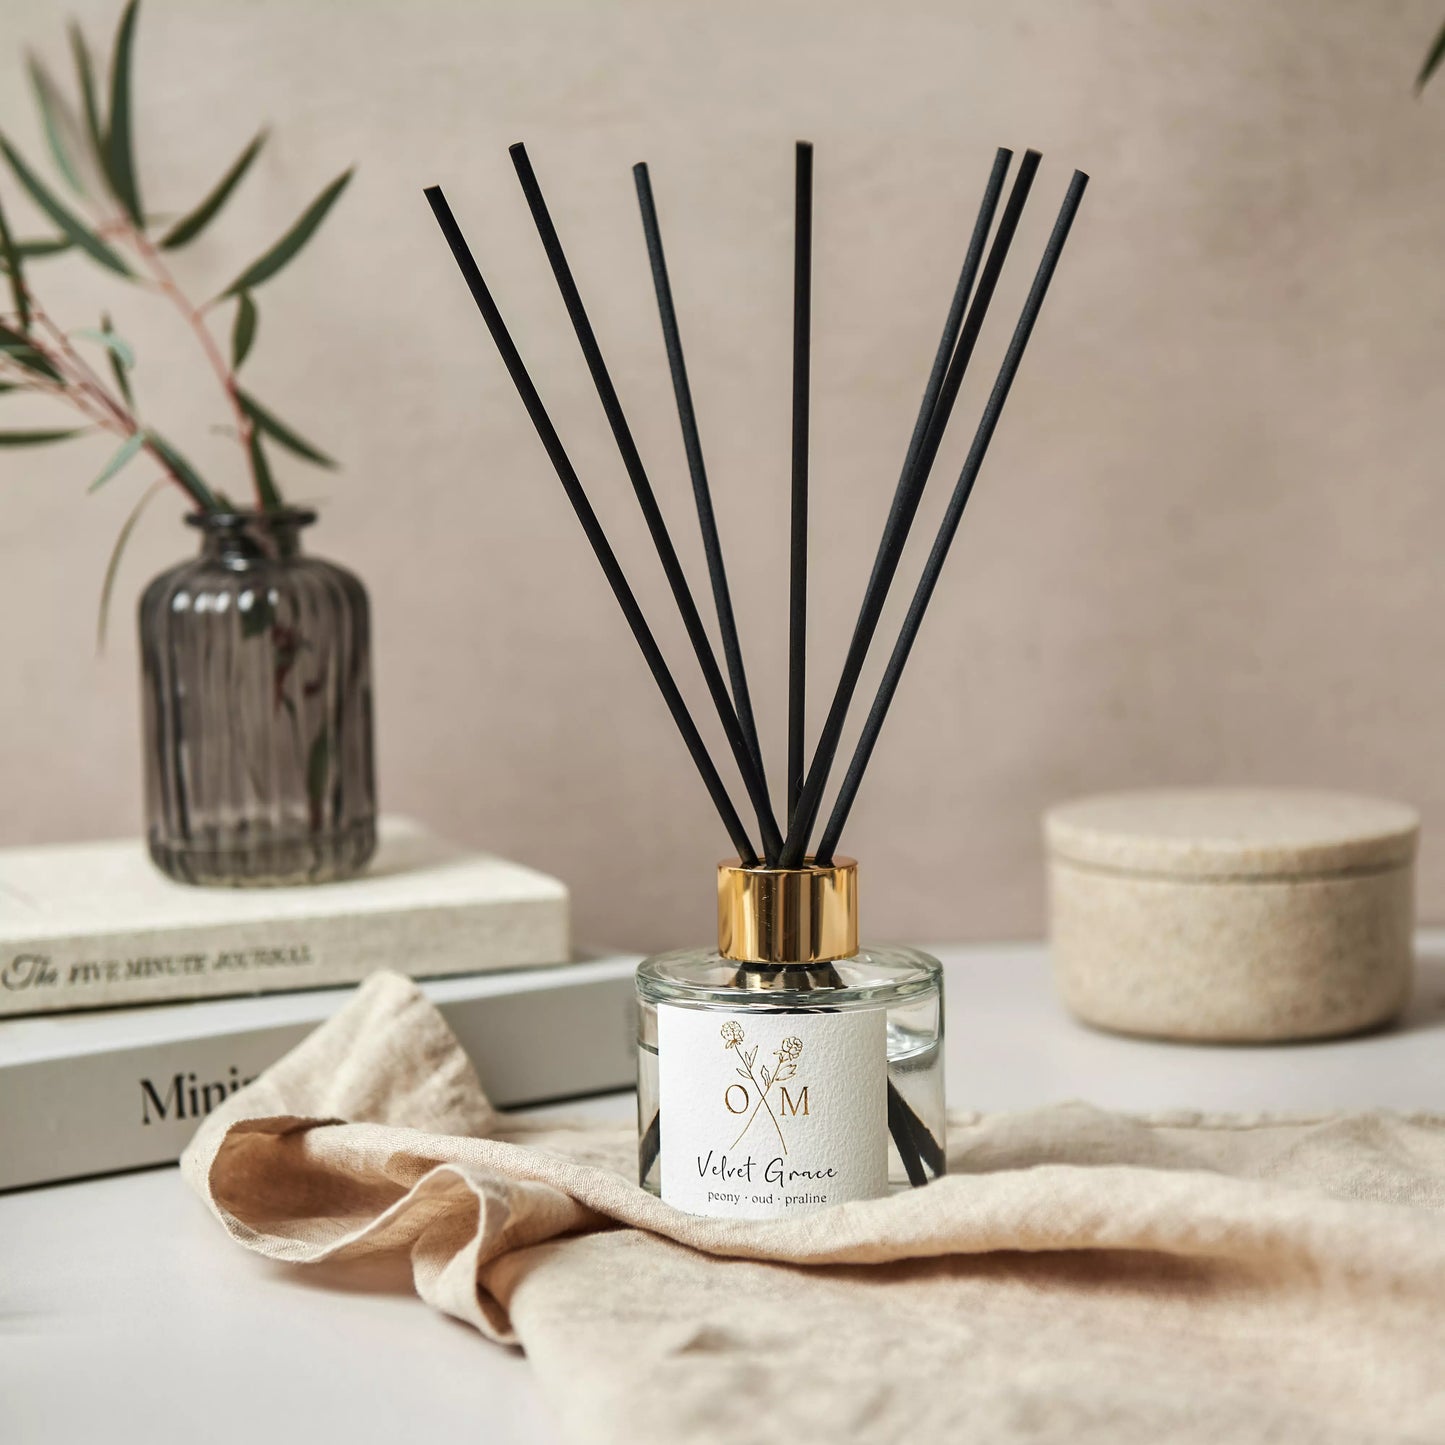 Our peony and oud diffuser is on display in a clear glass jar.